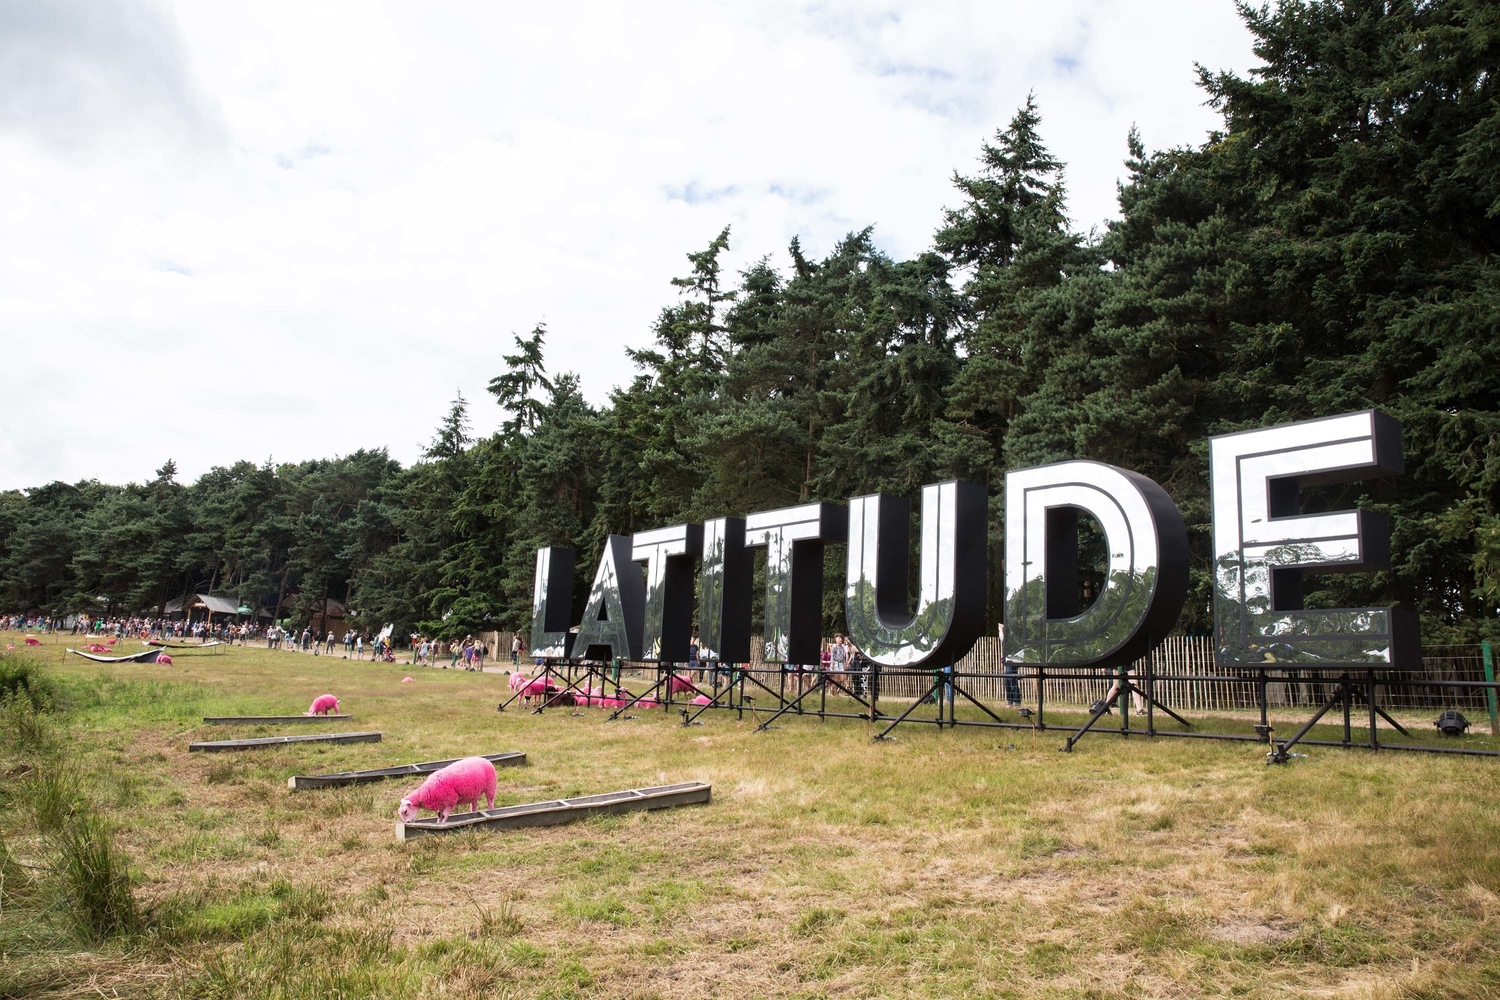 Latitude 2021 “will” take place, adds artists